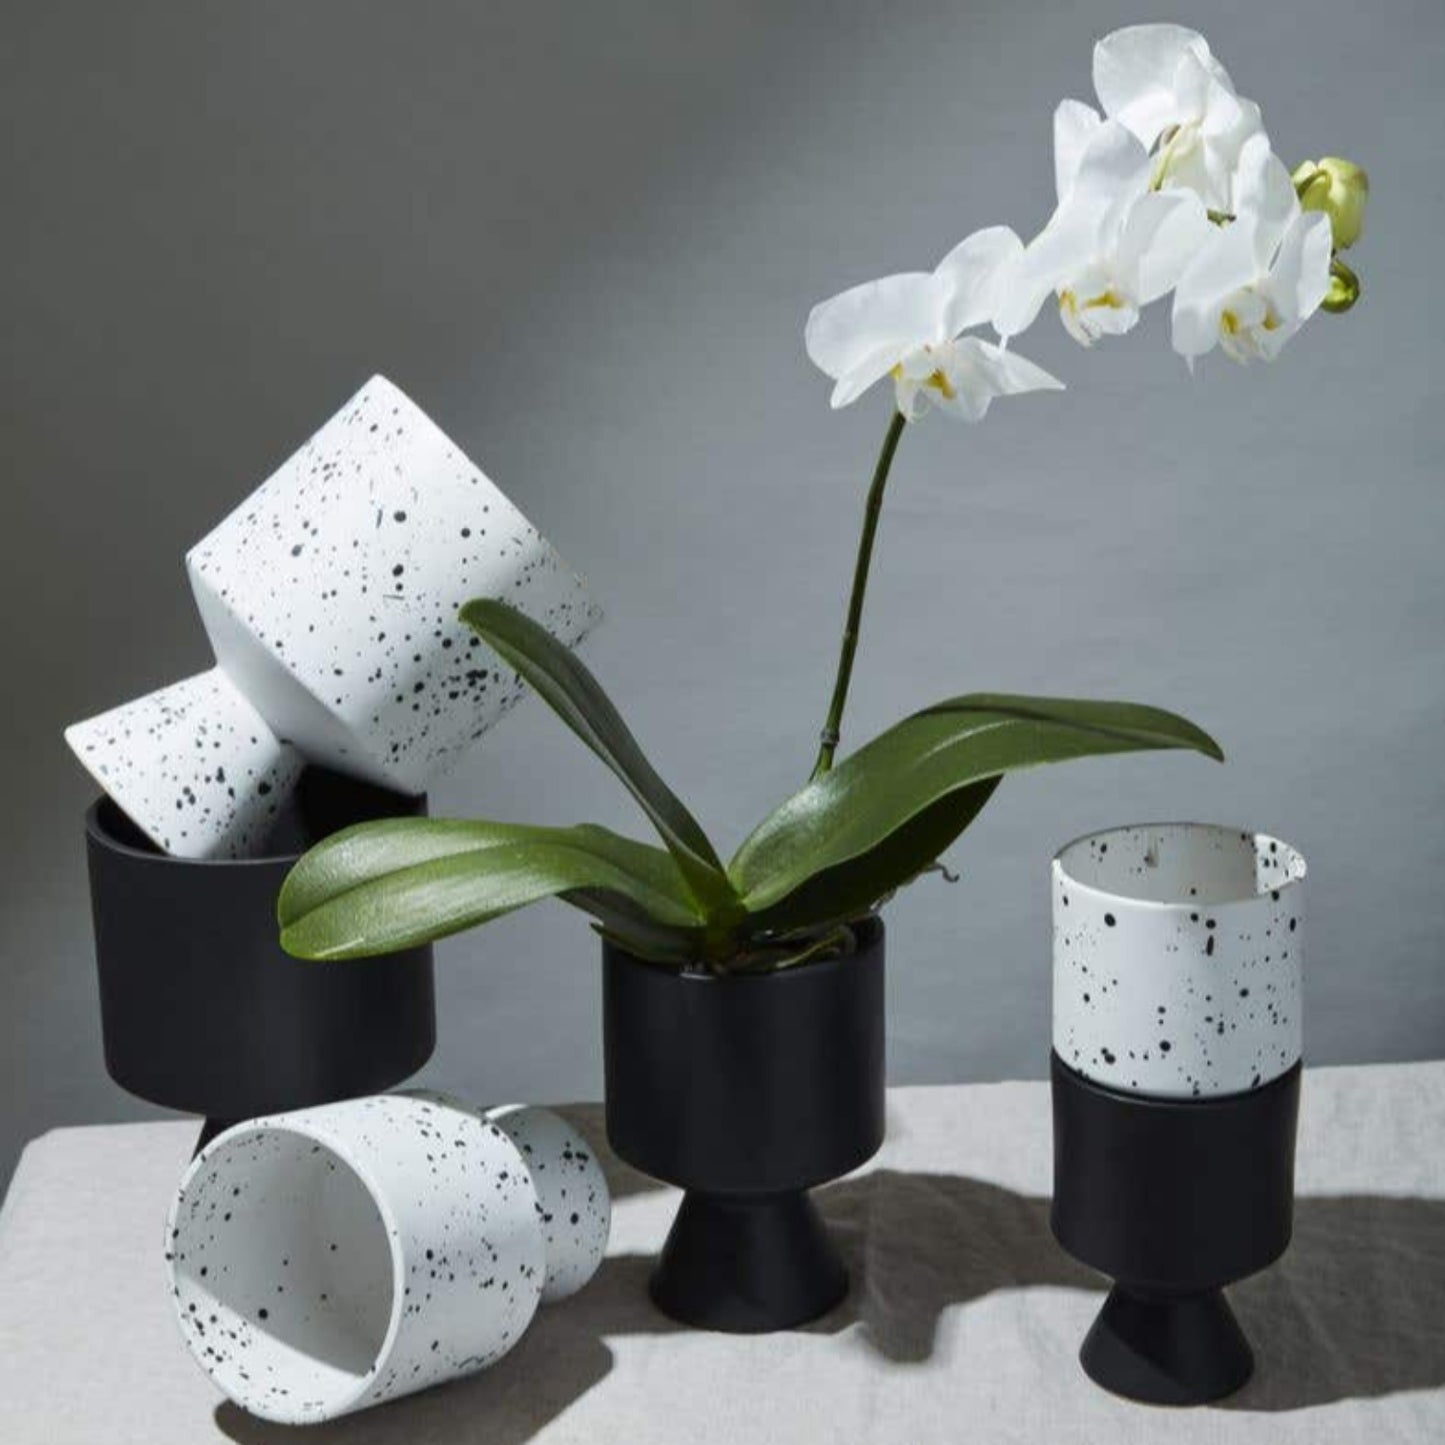 speckled,ceramic,pot,white,black spots,small plant holder,orchid,plant lover,compote,silhouette